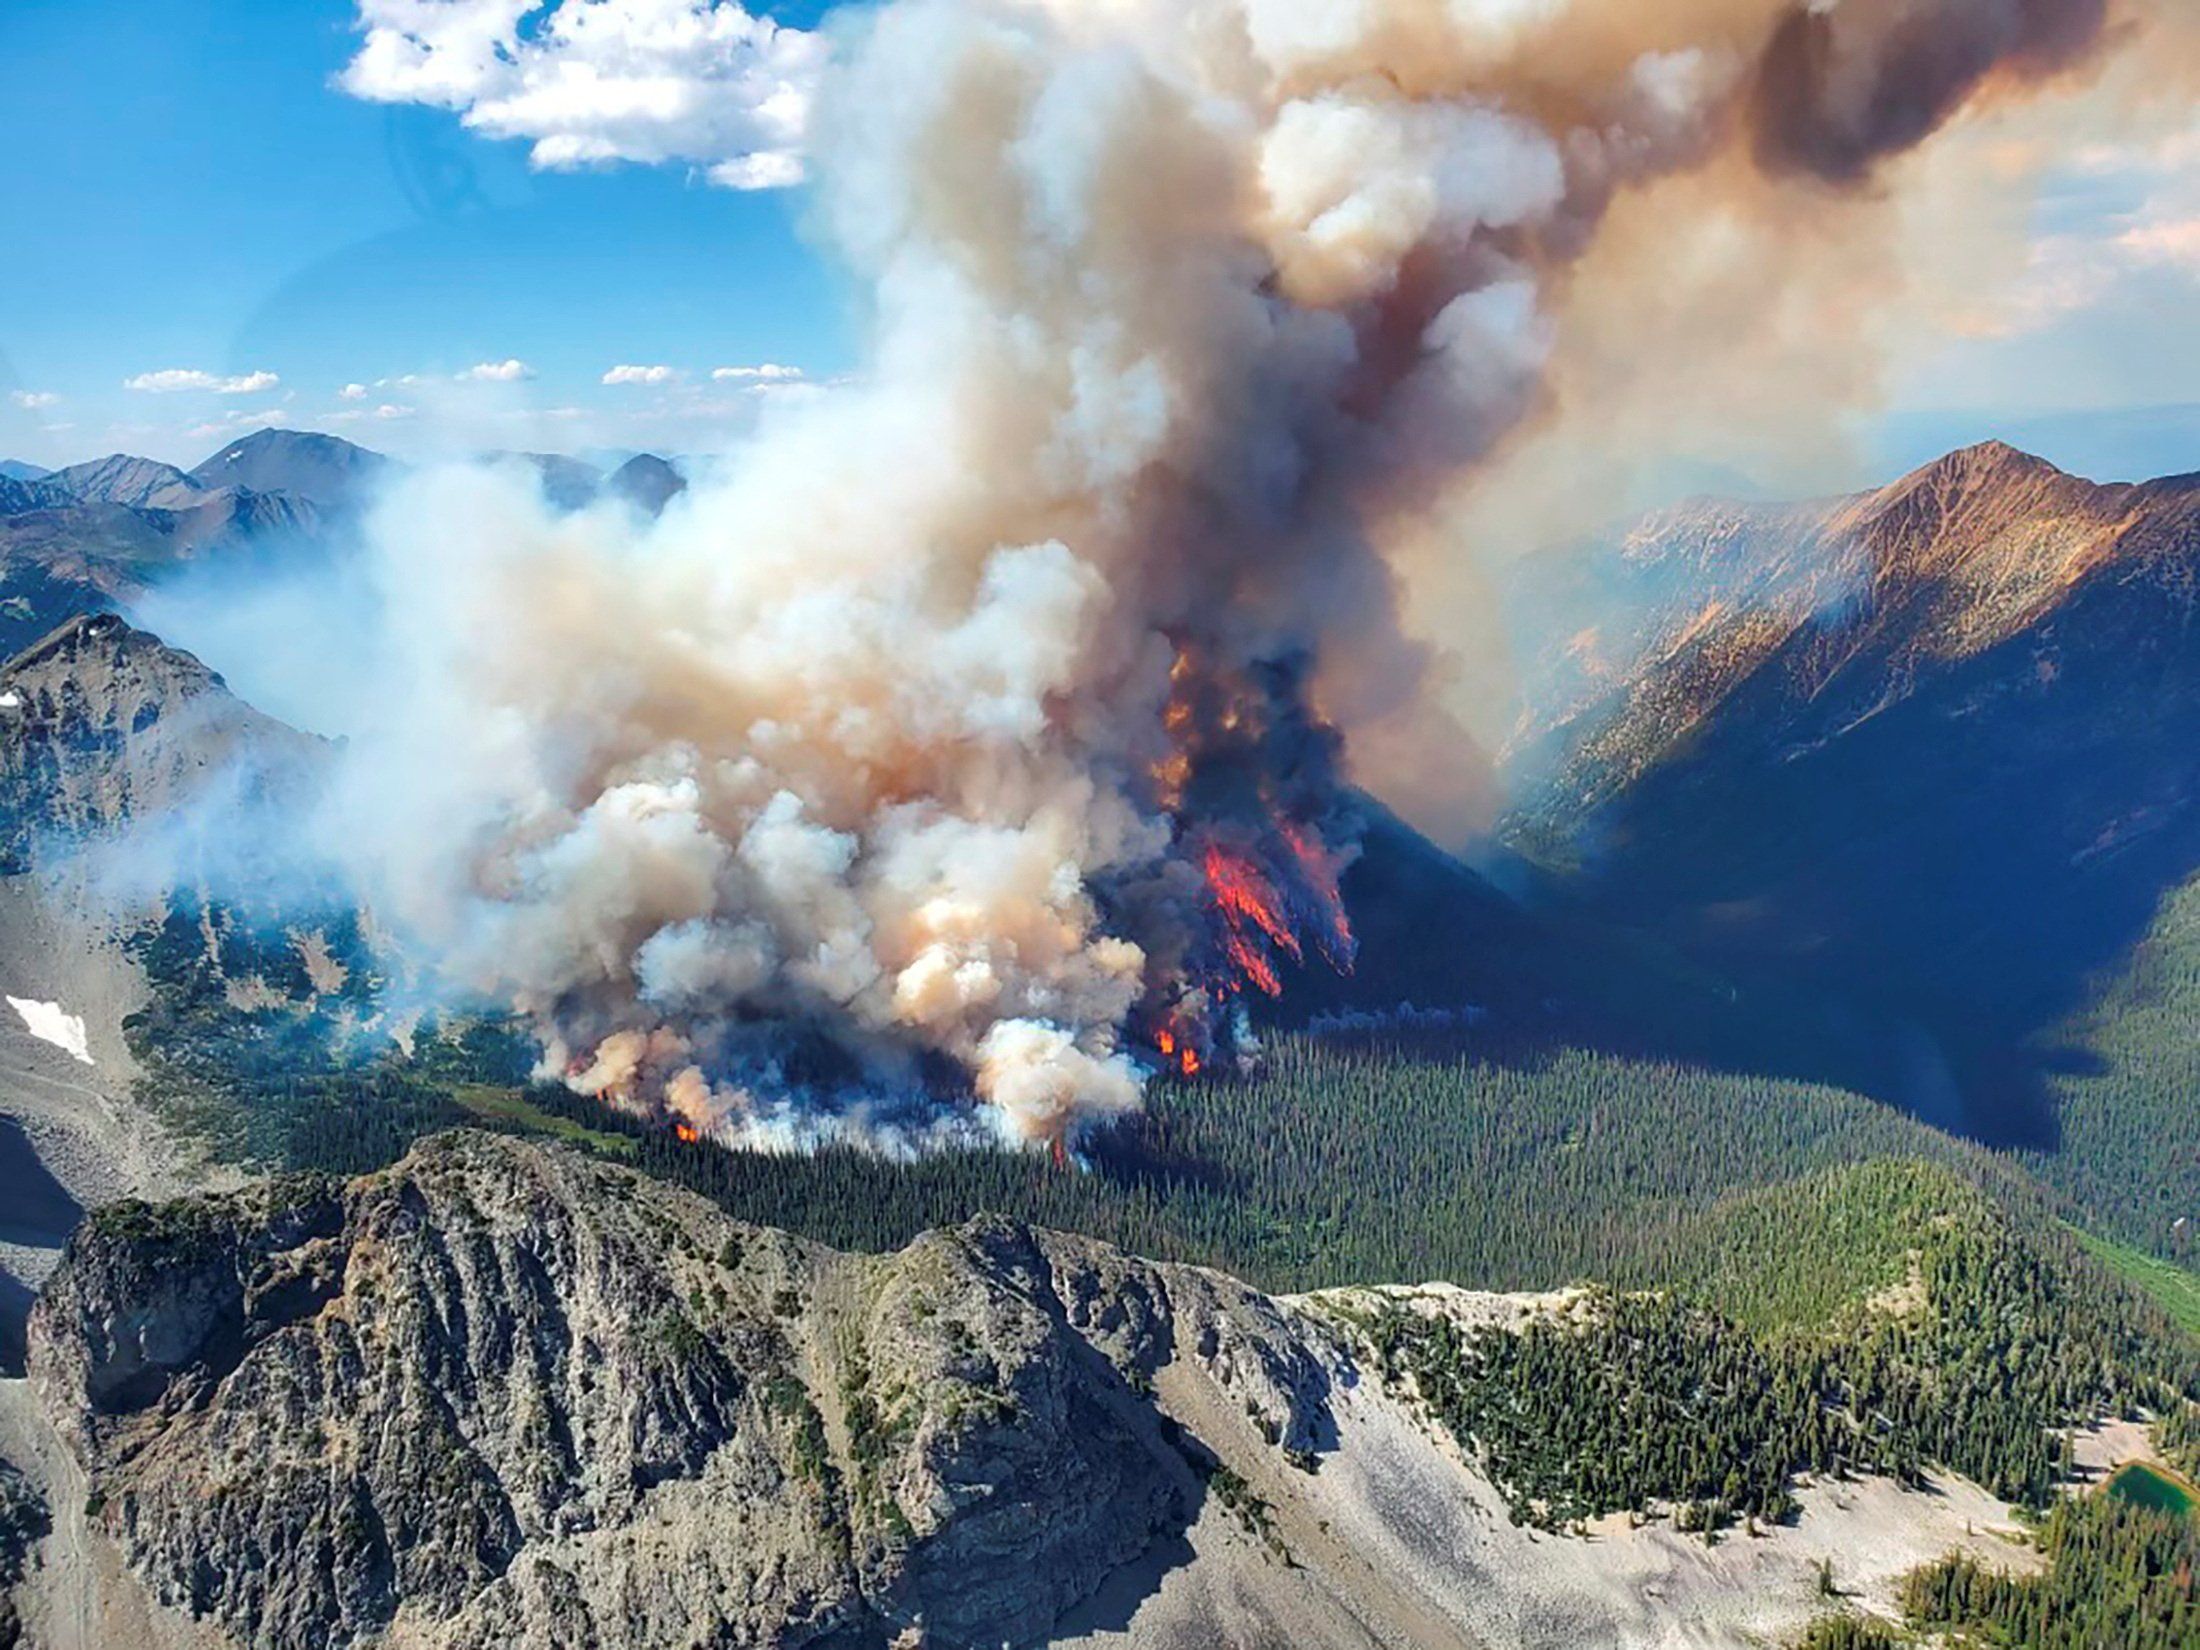 Smoke rises from the Texas Creek wildfire south of Lillooet, British Columbia.